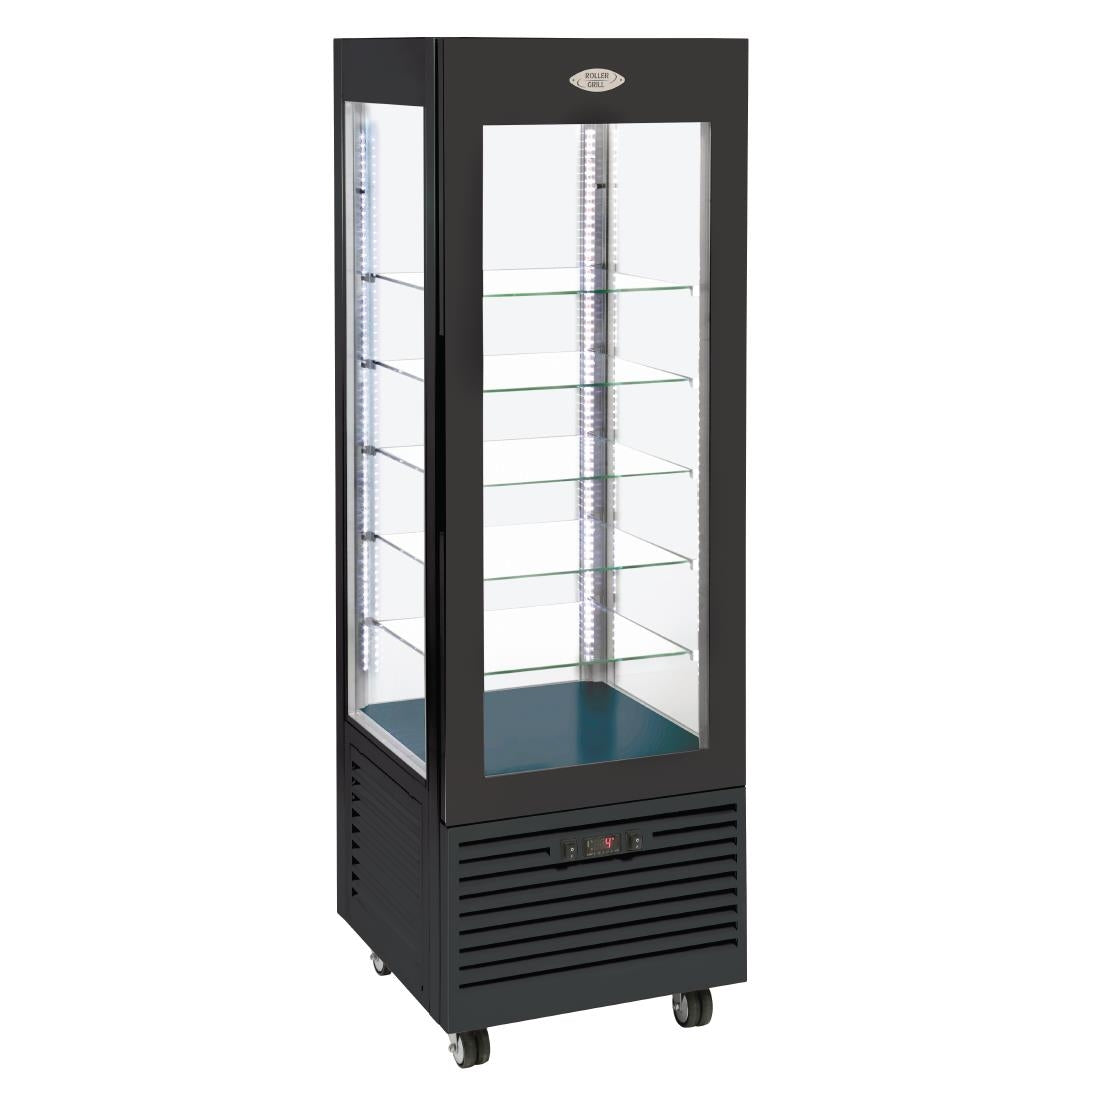 DT733 Roller Grill Display Fridge with Fixed Shelves